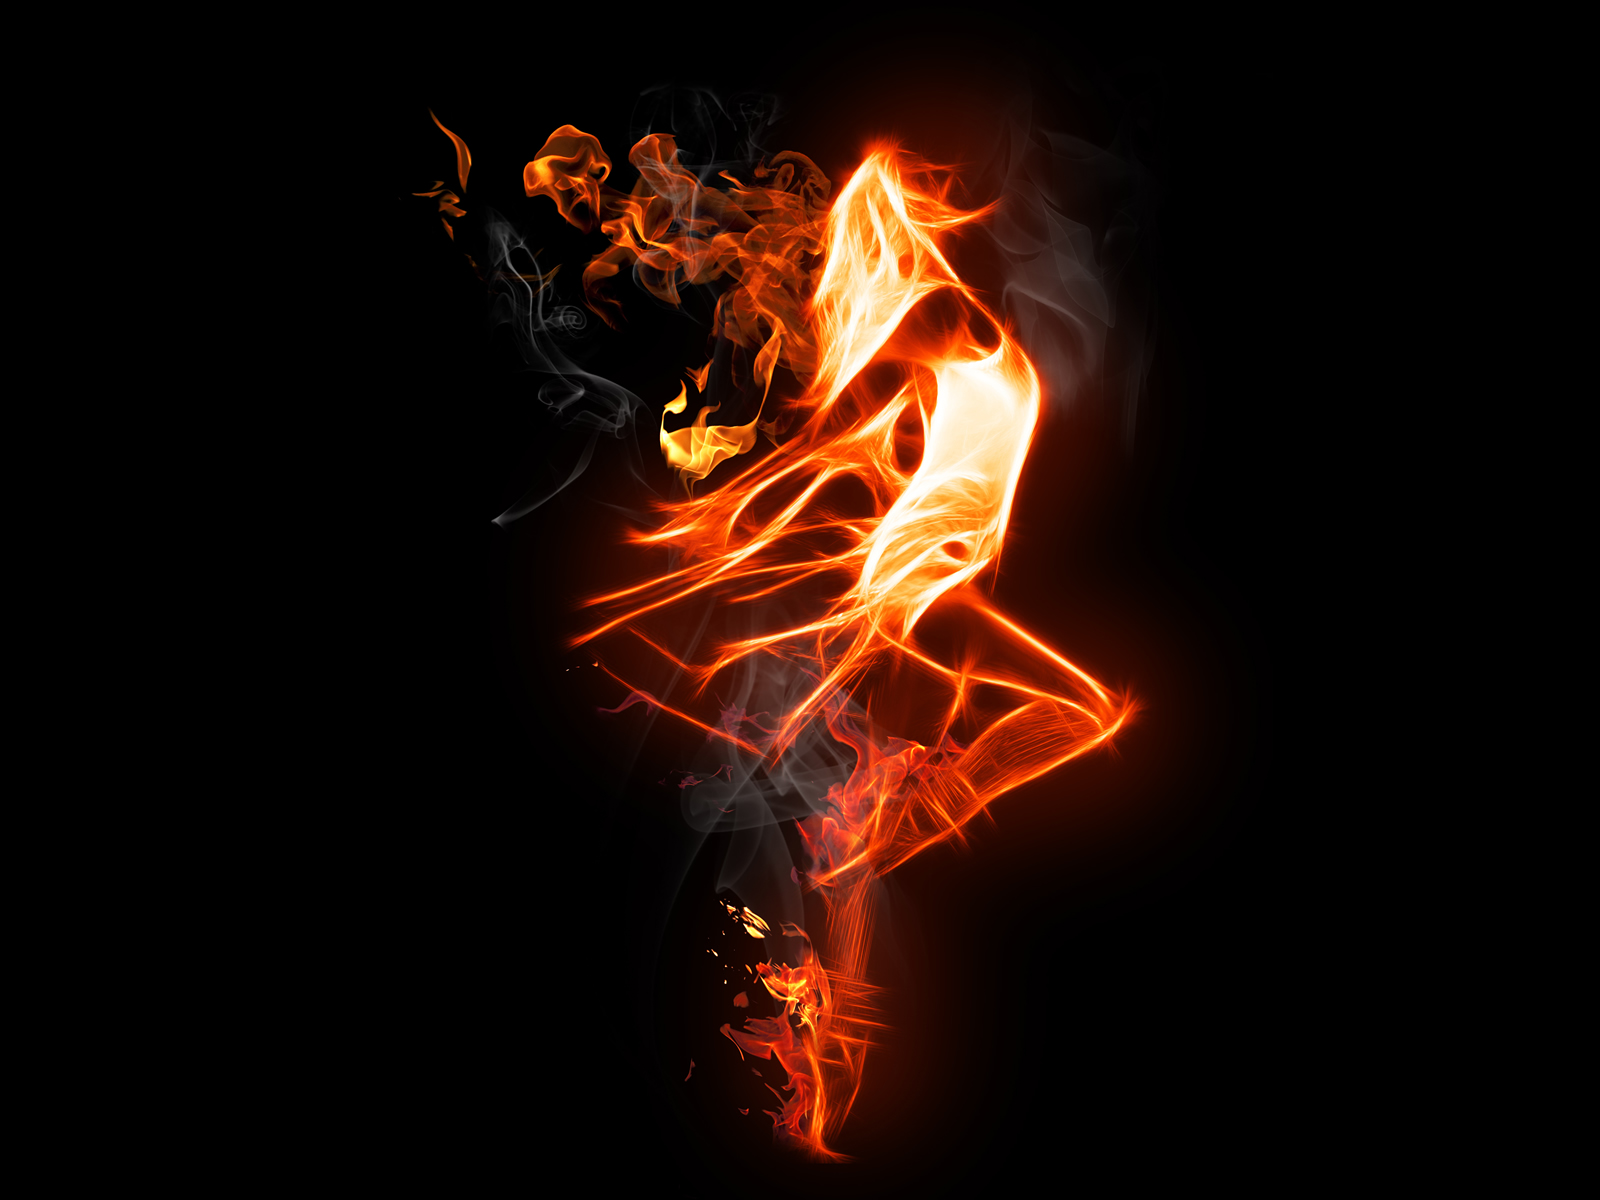 Wallpaper Details File Name Fire Uploaded By Volo Date